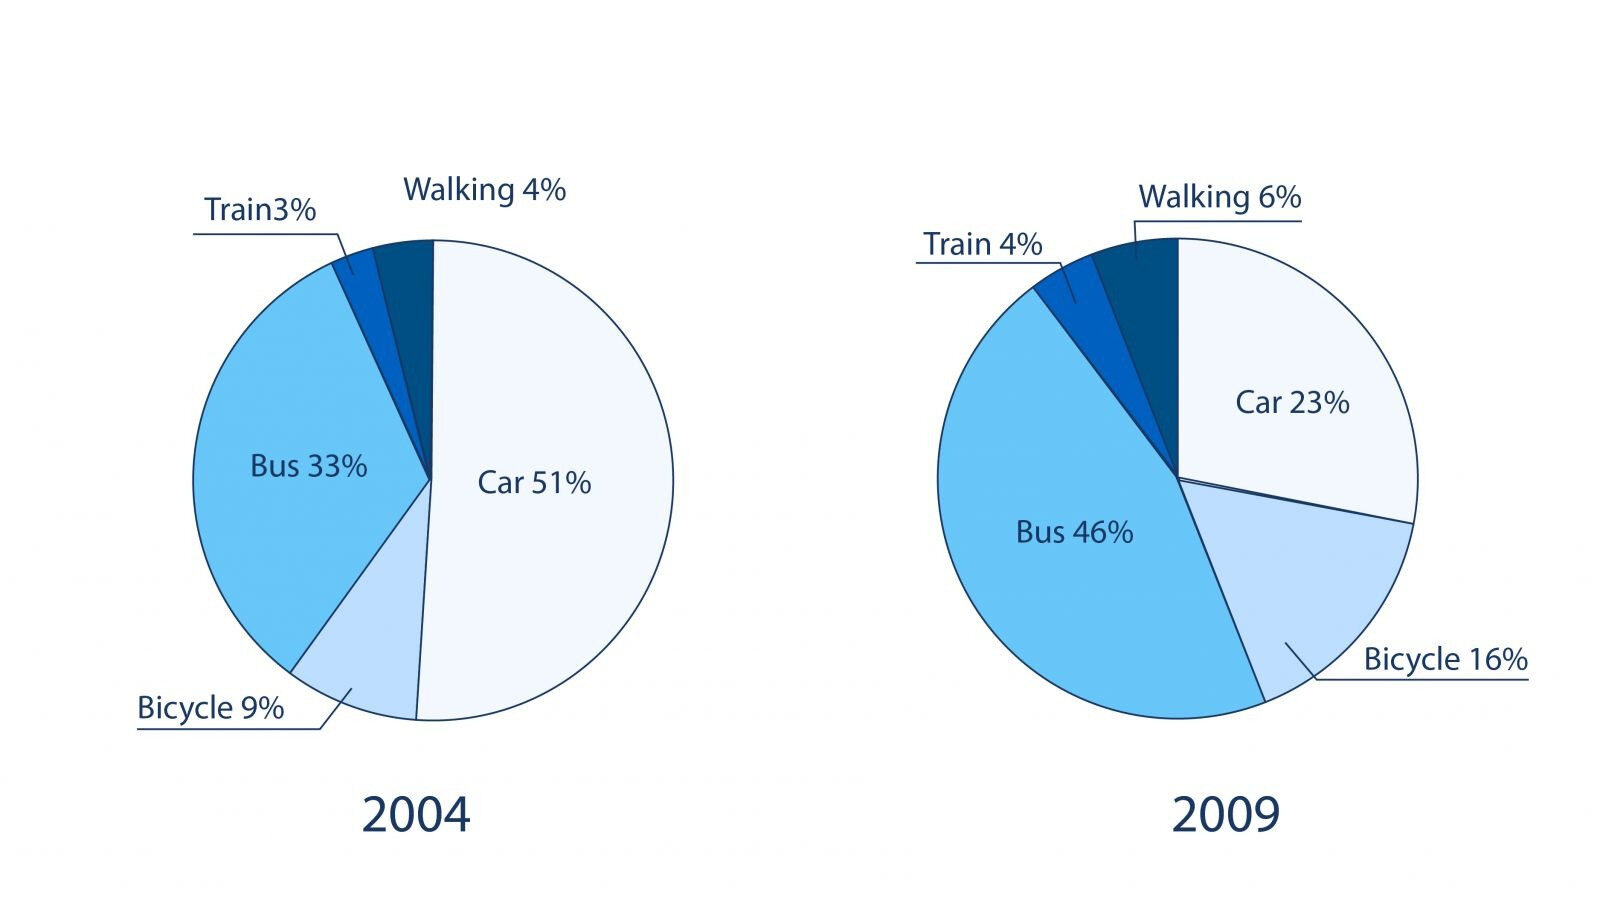 The pie charts provided illustrate two major changes in the use of modes of transport to a certain university between 2004 and 2009.